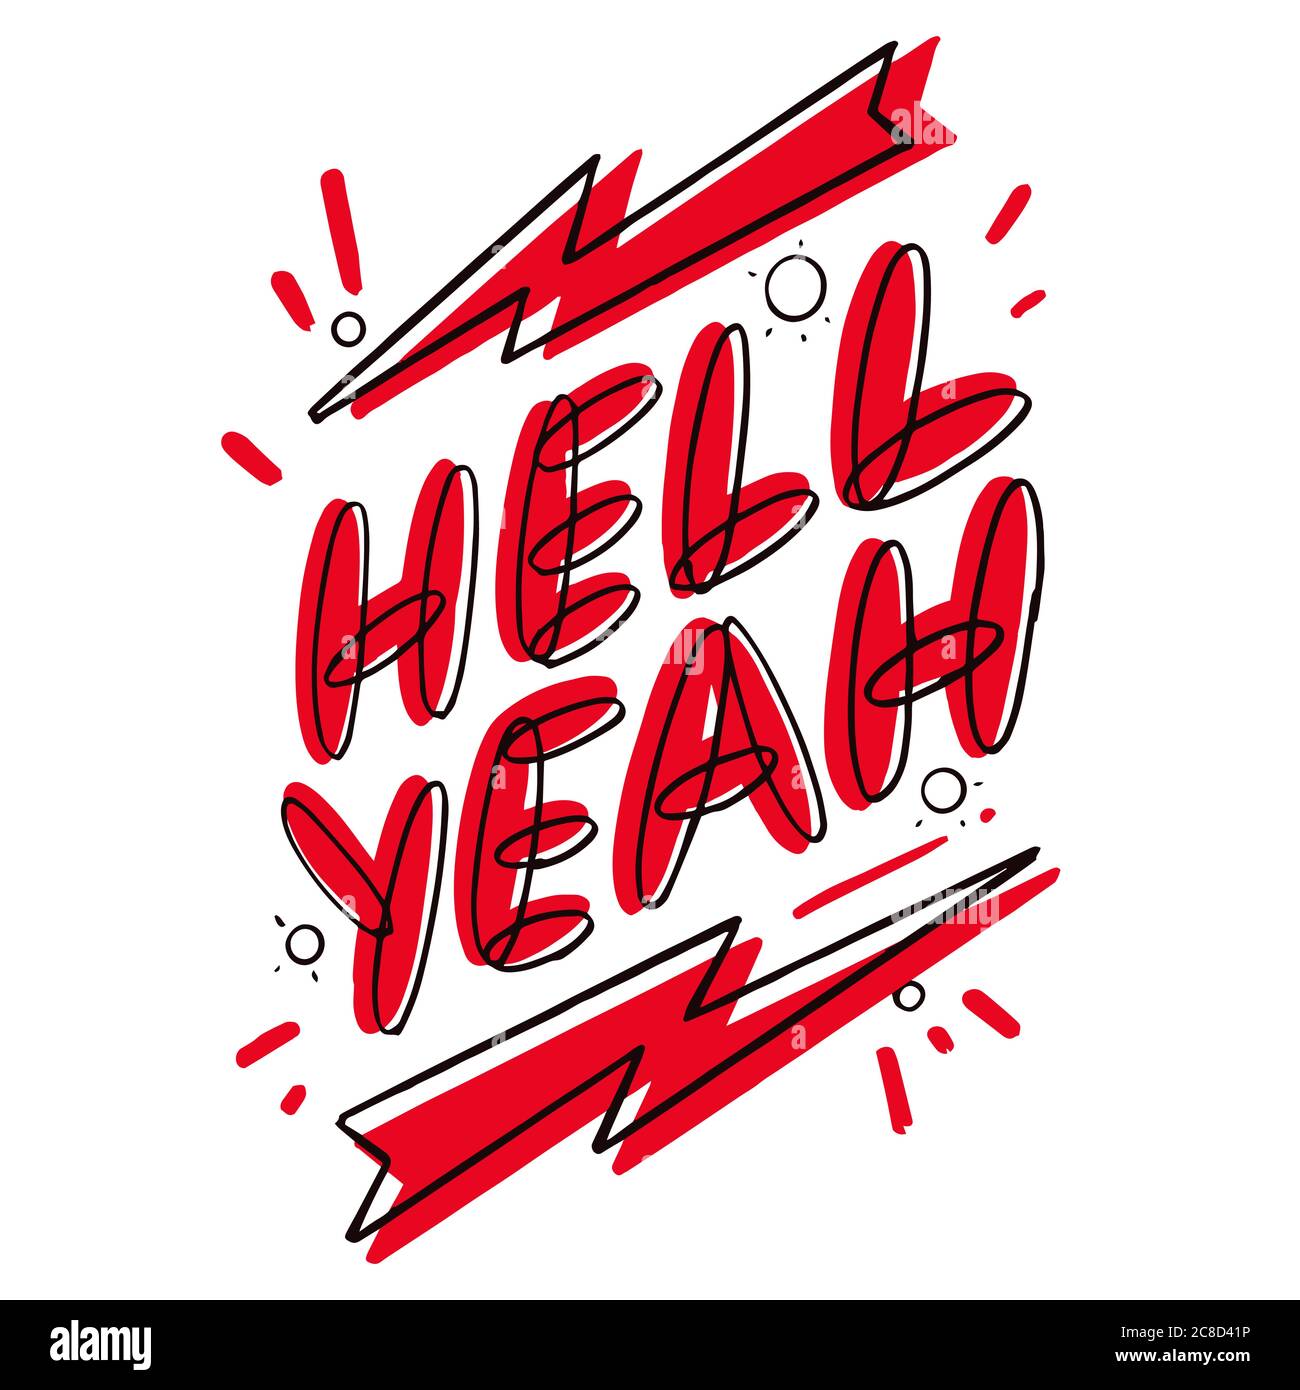 Hell Yeah. Hand lettering colorful logo. Design for banners, prints and posters etc. Stock Vector